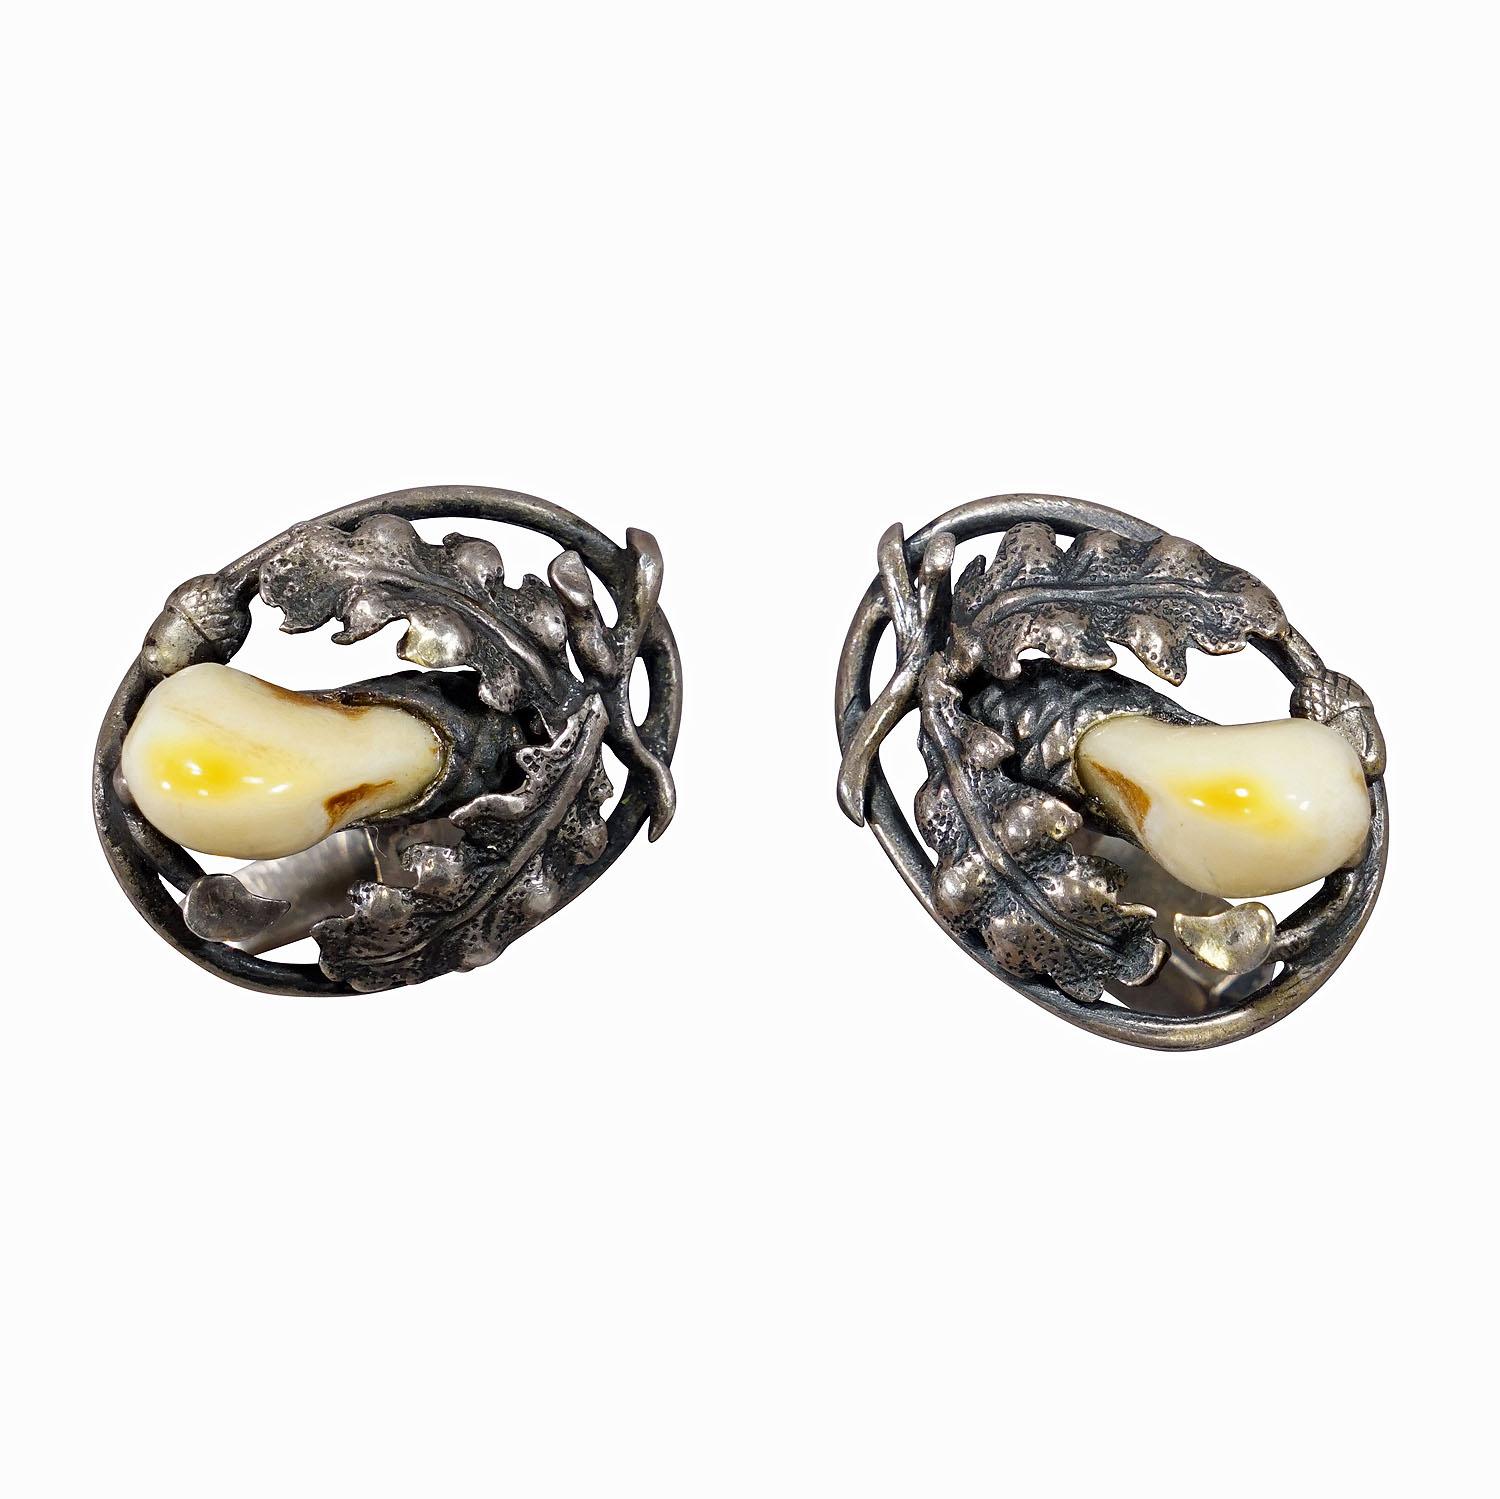 Vintage Bavarian Traditional Costume Jewelry Cufflinks

A pair Bavarian cufflinks from the middle of the 20th century. A beautiful piece of historical Bavarian folk art jewelry, a real collector's item. Together with a charivari and a hat with